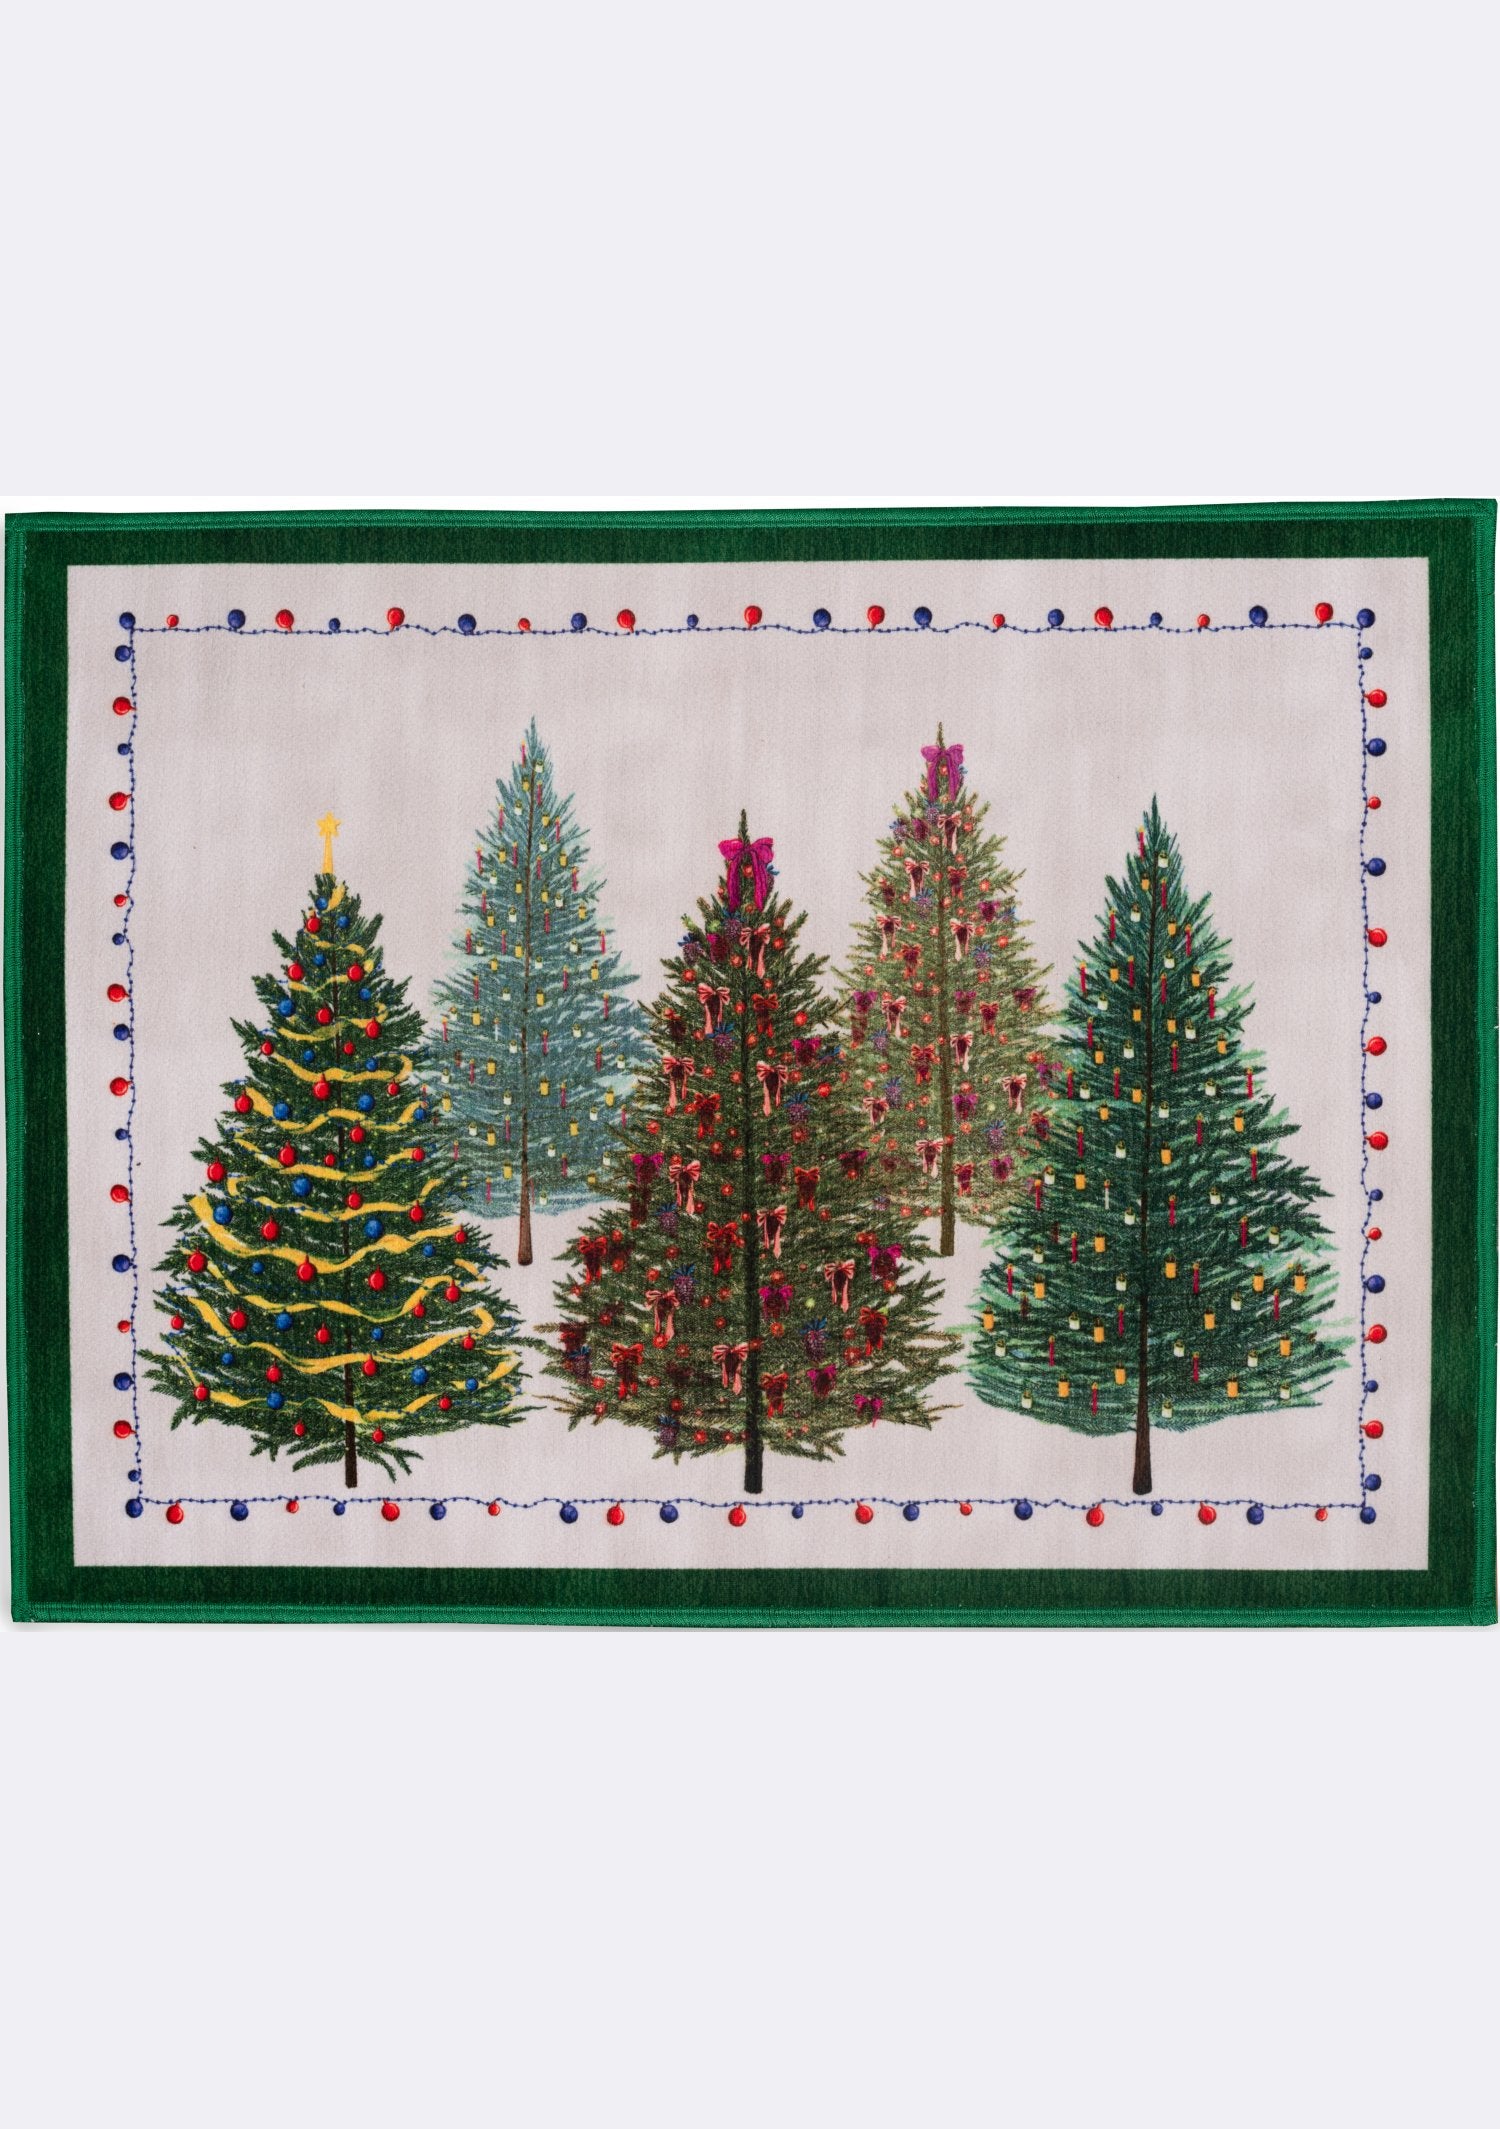 Tessitura Toscana Telerie, “Fairy Trees”, Xmas placemats pack of 2